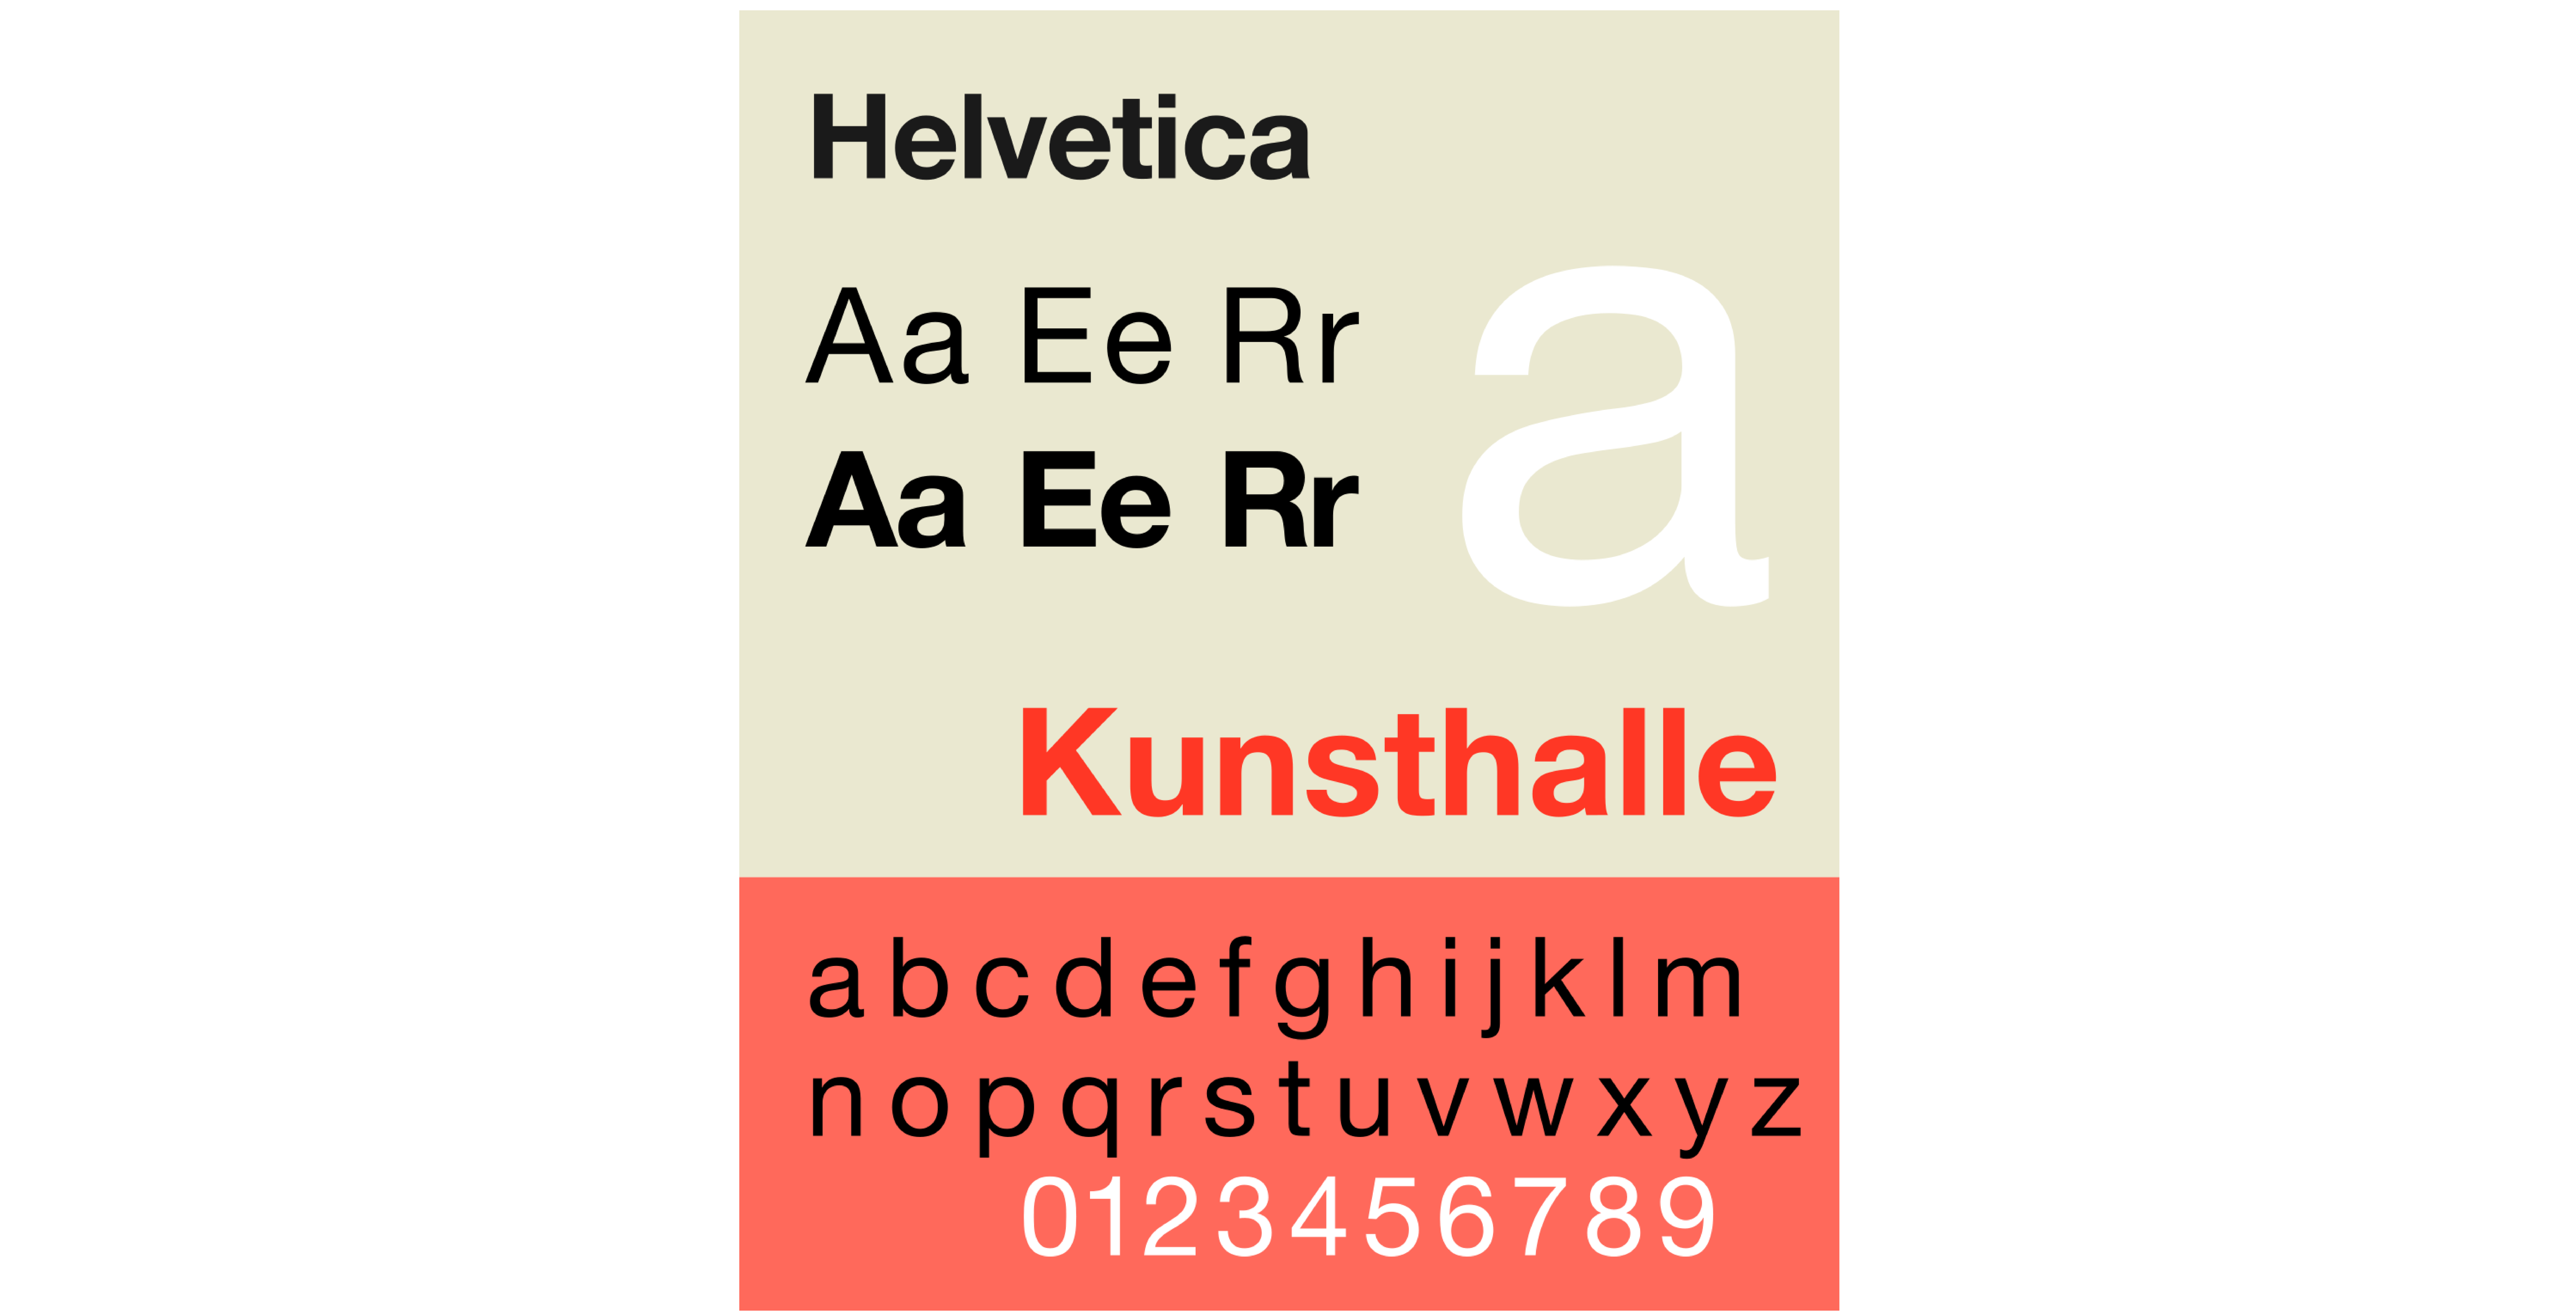 The Helvetica Typeface. 